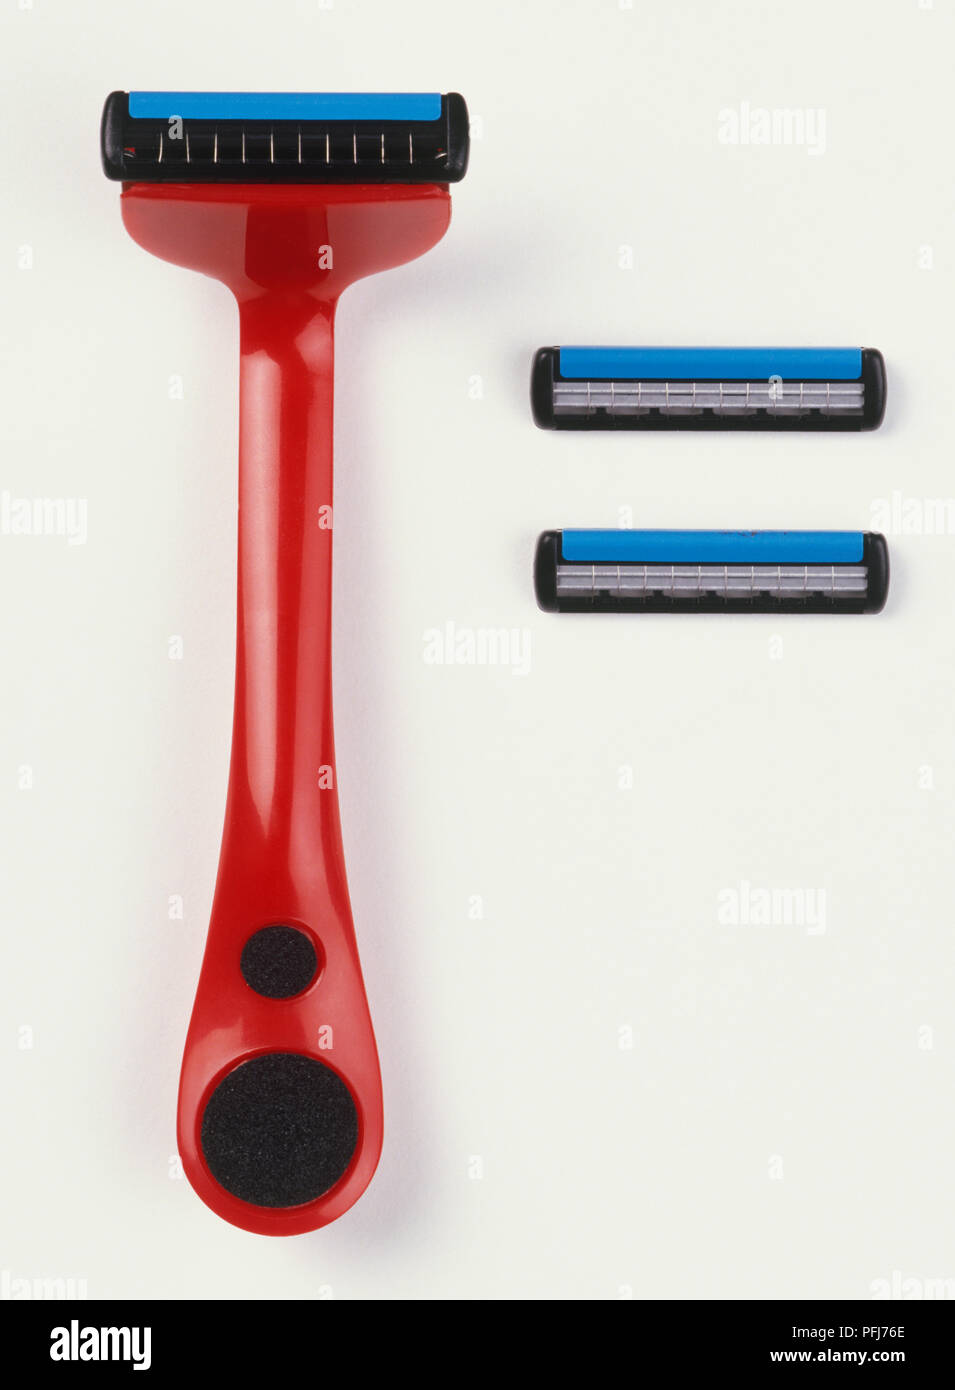 Disposable razor and two blades, close up. Stock Photo